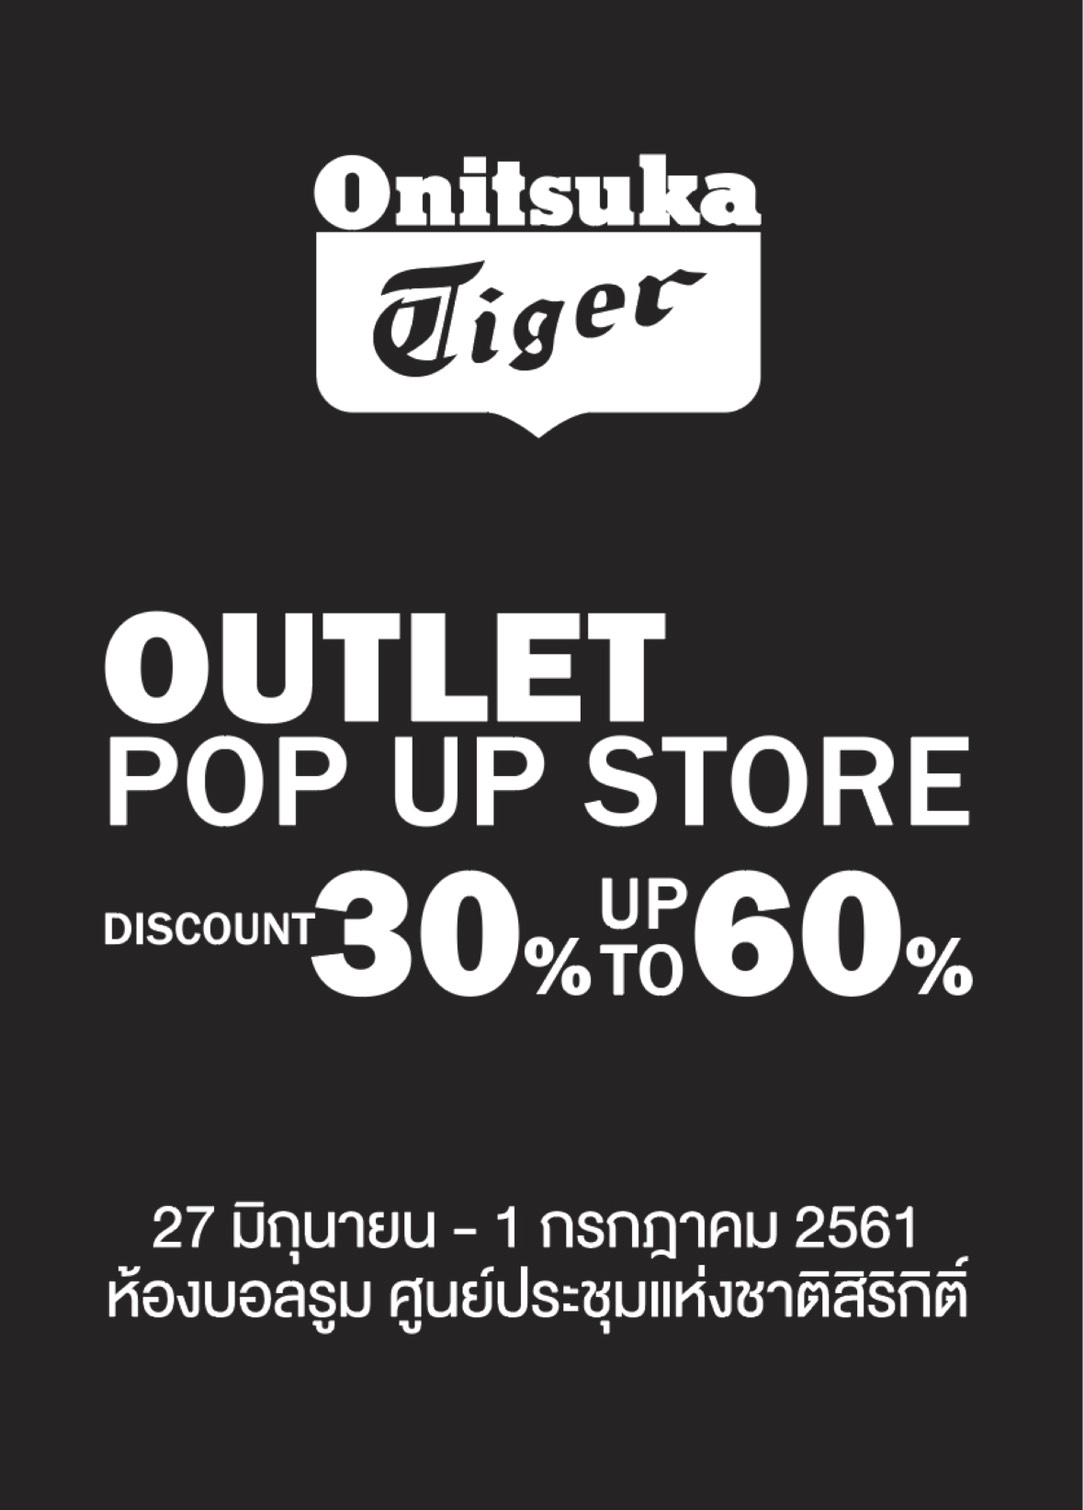 Onitsuka Tiger Outlet Popup Store